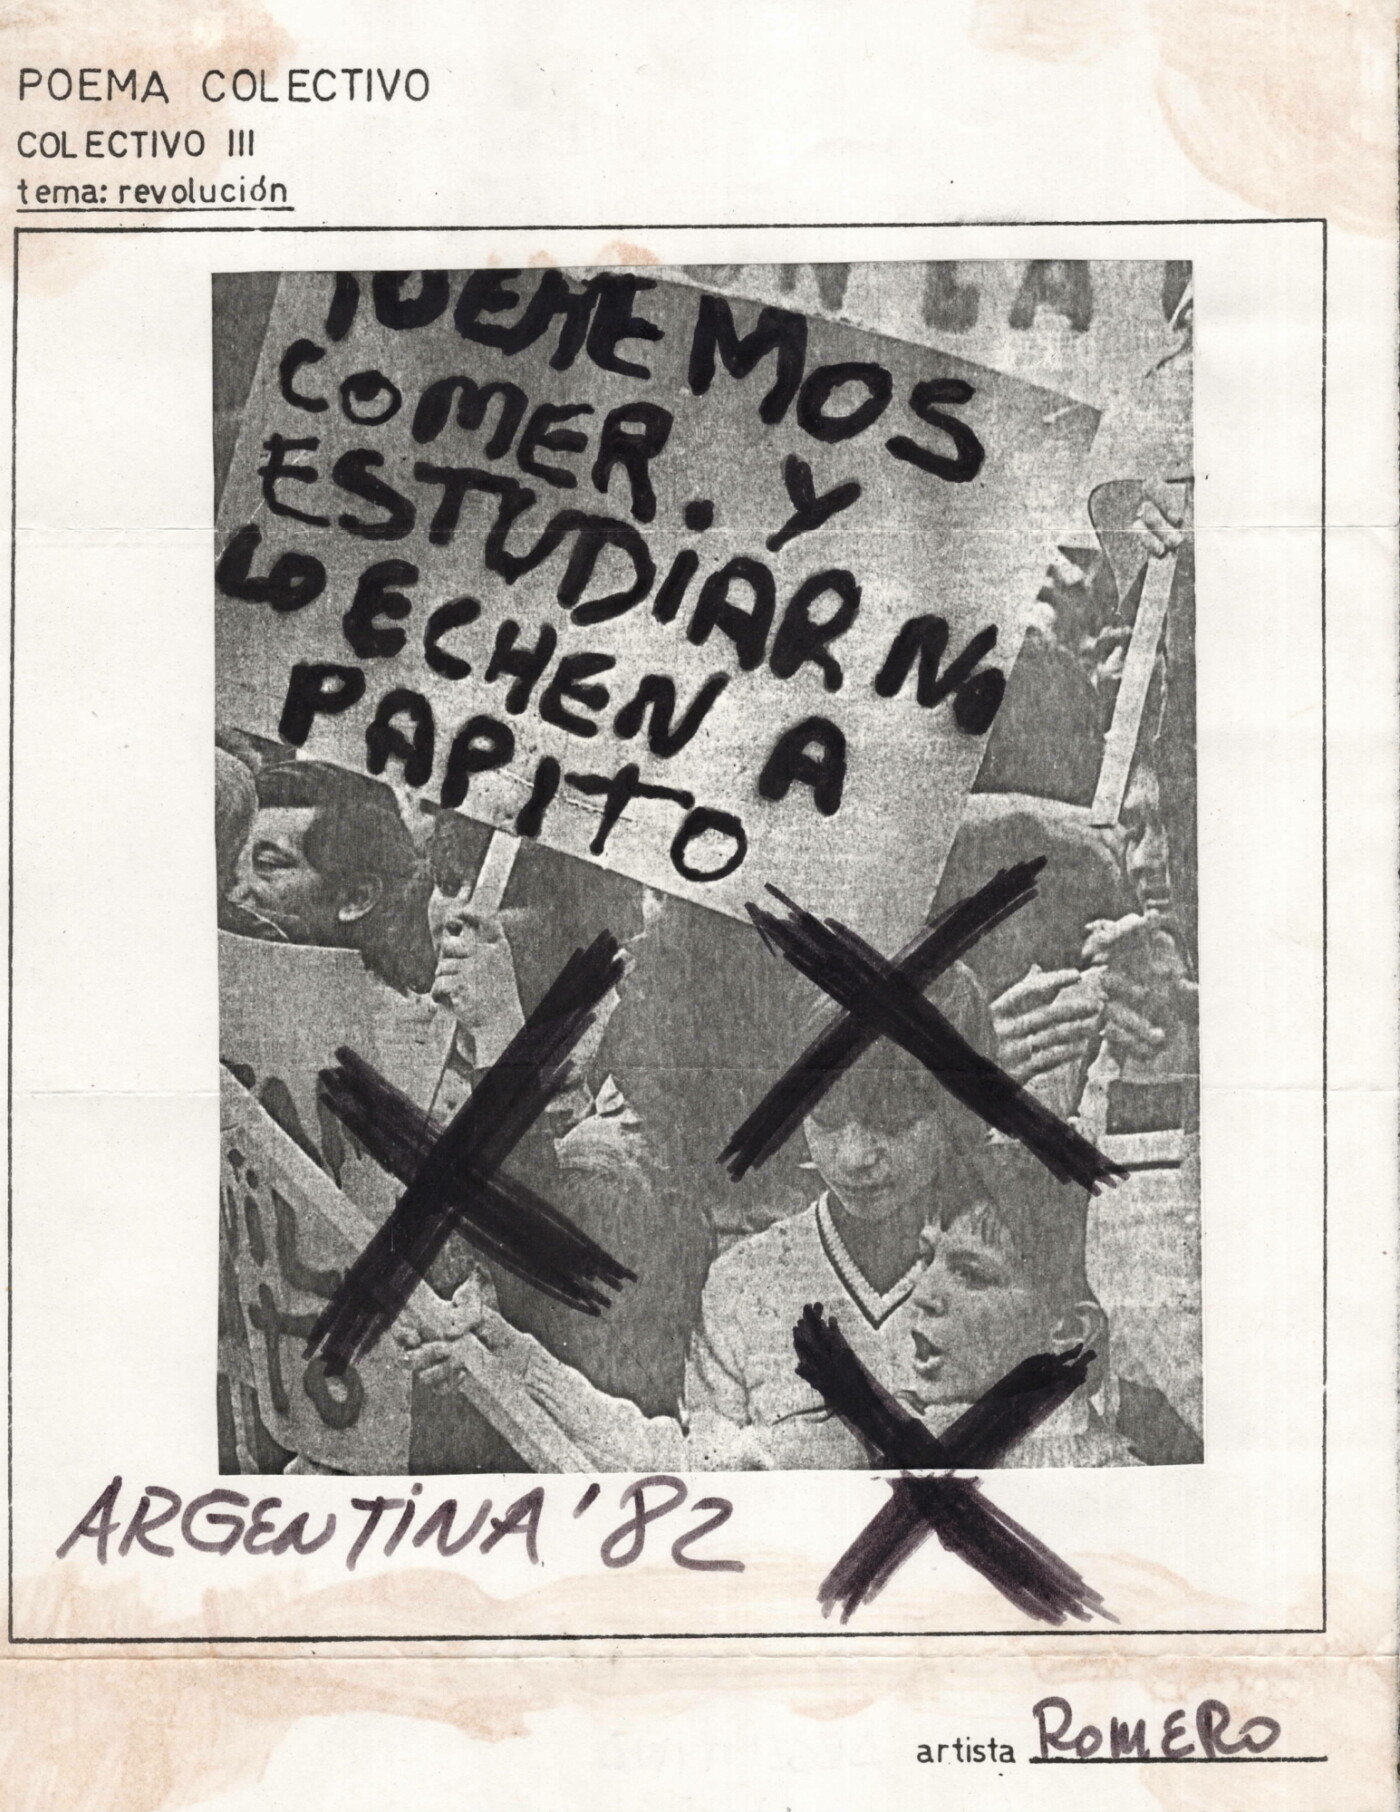 Collage of a black-and-white newspaper photograph on paper. The photograph depicts young people marching as part of a demonstration. The collage is written over in black ink: the protest sign reads (in Spanish) "Queremos comer y estudiar no echen a Papito". Three black X's are marked in black ink. The work is signed "Romero" and dated "Argentina 1982".